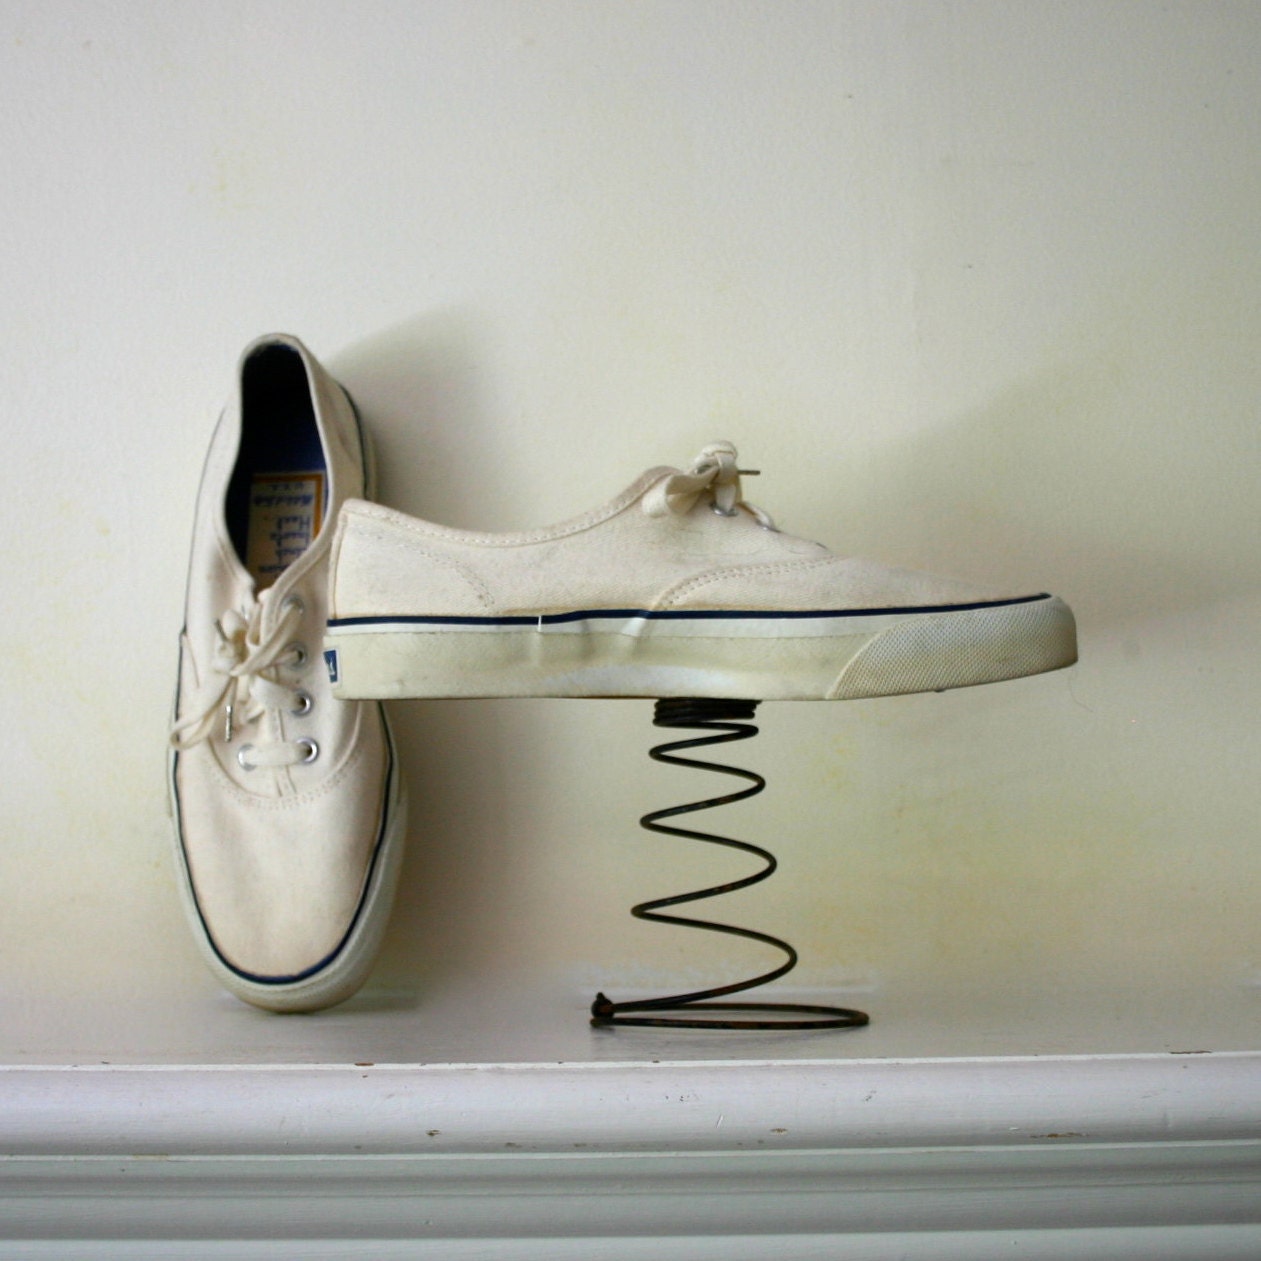 cool Vintage Sears sneakers great for boating or a walk in the park